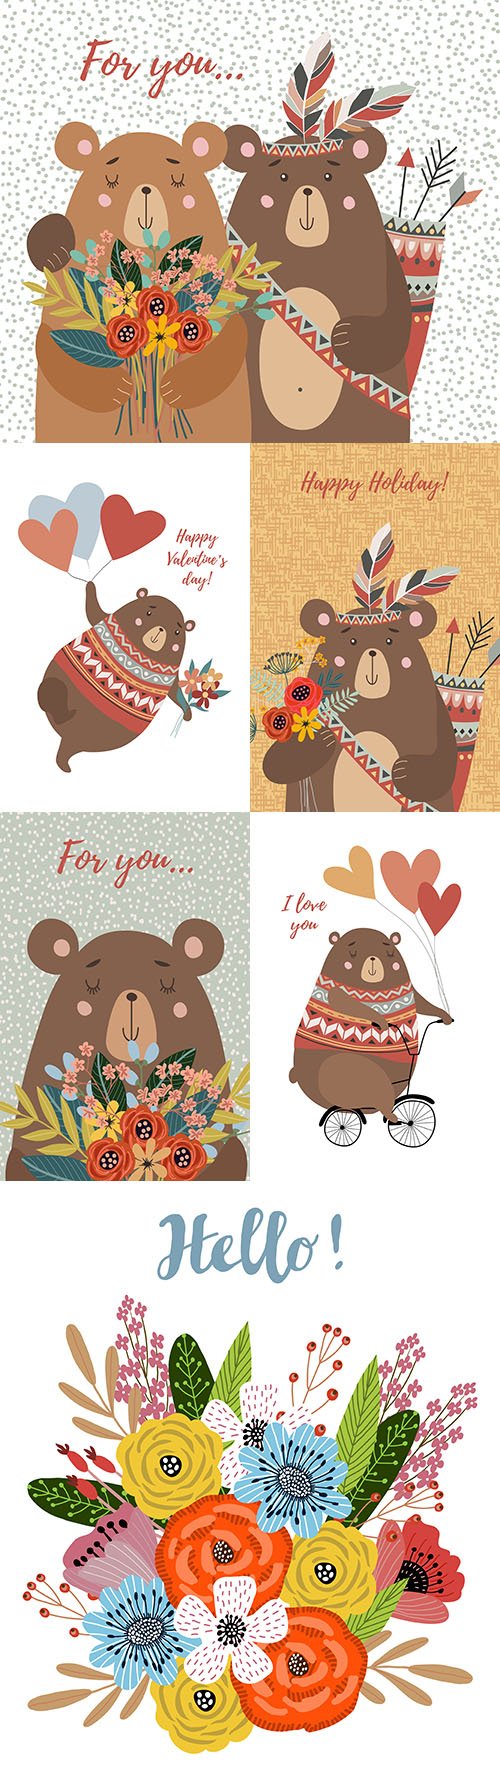 Bear with bouquet colors flat style iluustration